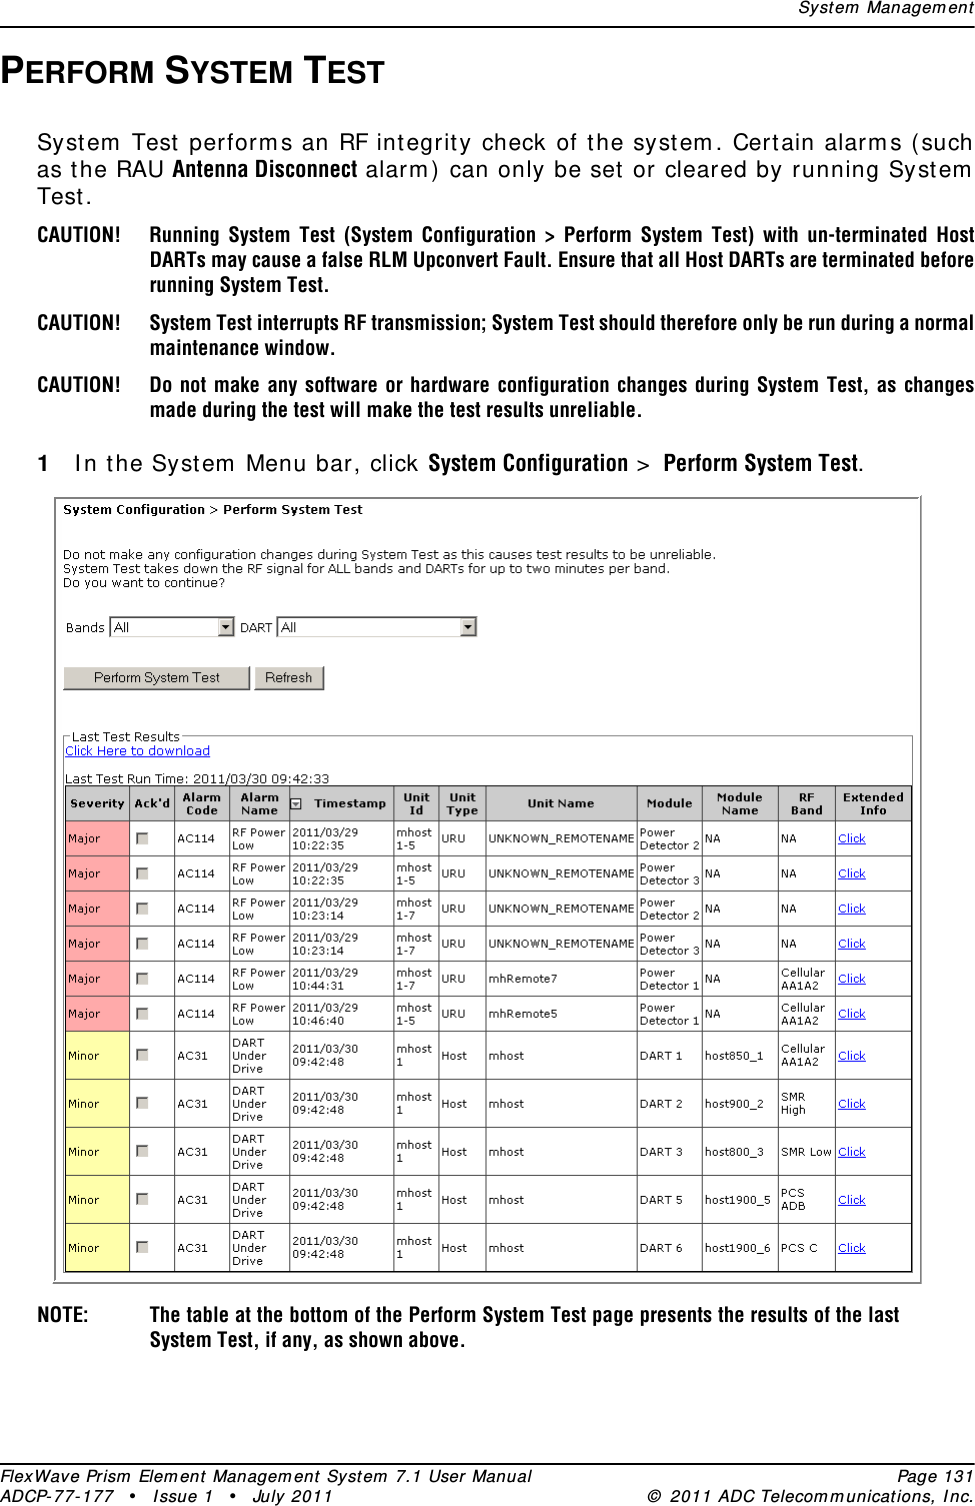 Syst em  Managem entFlexWave Prism  Elem ent Managem ent  Syst em  7.1 User Manual Page 131ADCP- 77- 177  • I ssue 1 • July 2011 ©  2011 ADC Telecom m unicat ions, I nc.PERFORM SYSTEM TESTSyst em  Test perform s an RF integrit y check of the syst em . Cert ain alarm s ( such as the RAU Antenna Disconnect alarm ) can only be set  or cleared by running Syst em  Test .CAUTION! Running System Test (System Configuration &gt; Perform System Test) with un-terminated Host DARTs may cause a false RLM Upconvert Fault. Ensure that all Host DARTs are terminated before running System Test.CAUTION! System Test interrupts RF transmission; System Test should therefore only be run during a normal maintenance window.CAUTION! Do not make any software or hardware configuration changes during System Test, as changes made during the test will make the test results unreliable.1I n the Syst em  Menu bar, click System Configuration &gt;  Perform System Test.NOTE: The table at the bottom of the Perform System Test page presents the results of the last System Test, if any, as shown above.